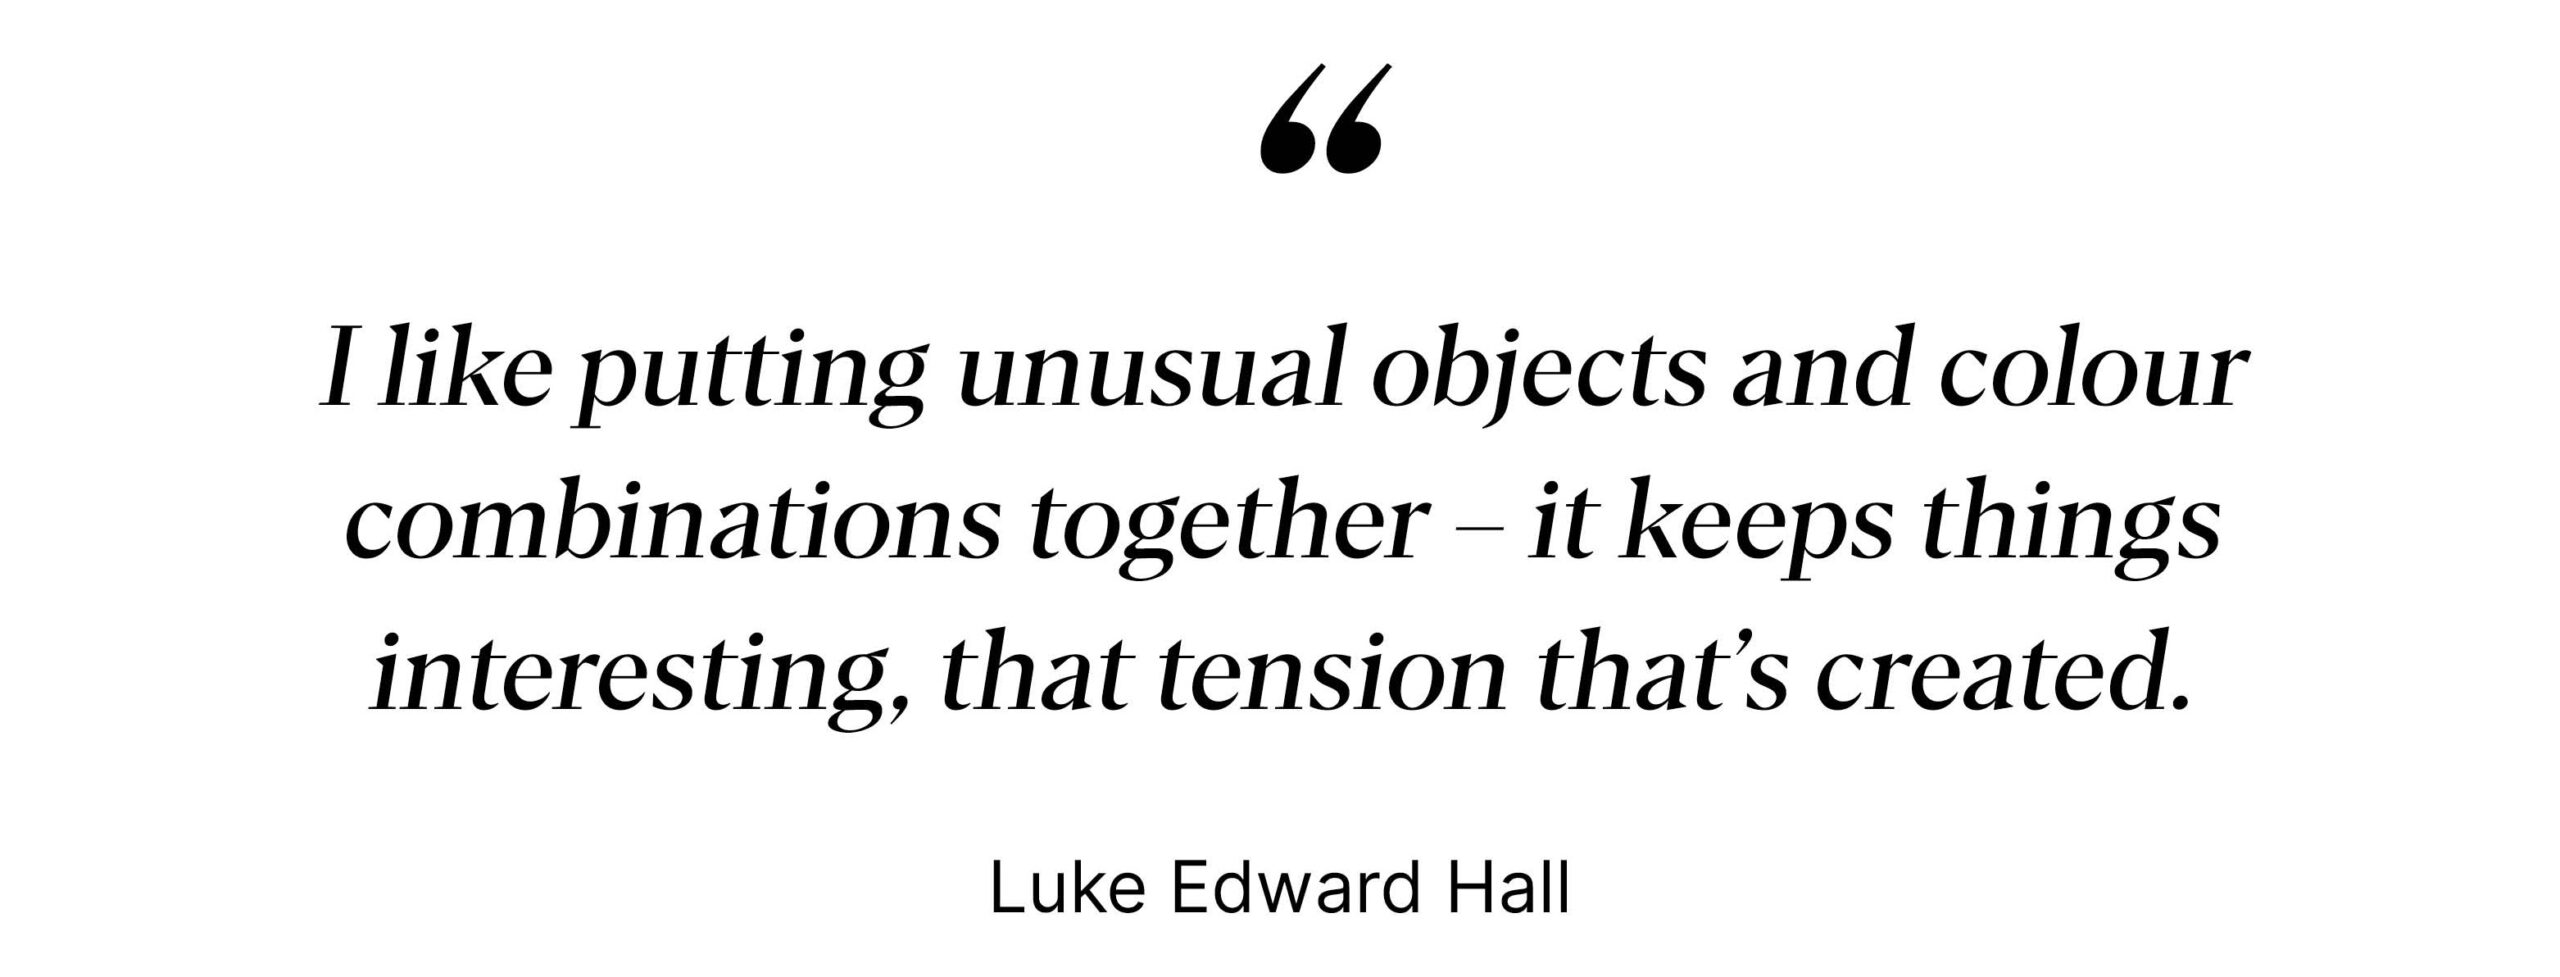 "I like putting unusual objects and colour combinations together - it creates a tension" - Luke Edward Hall